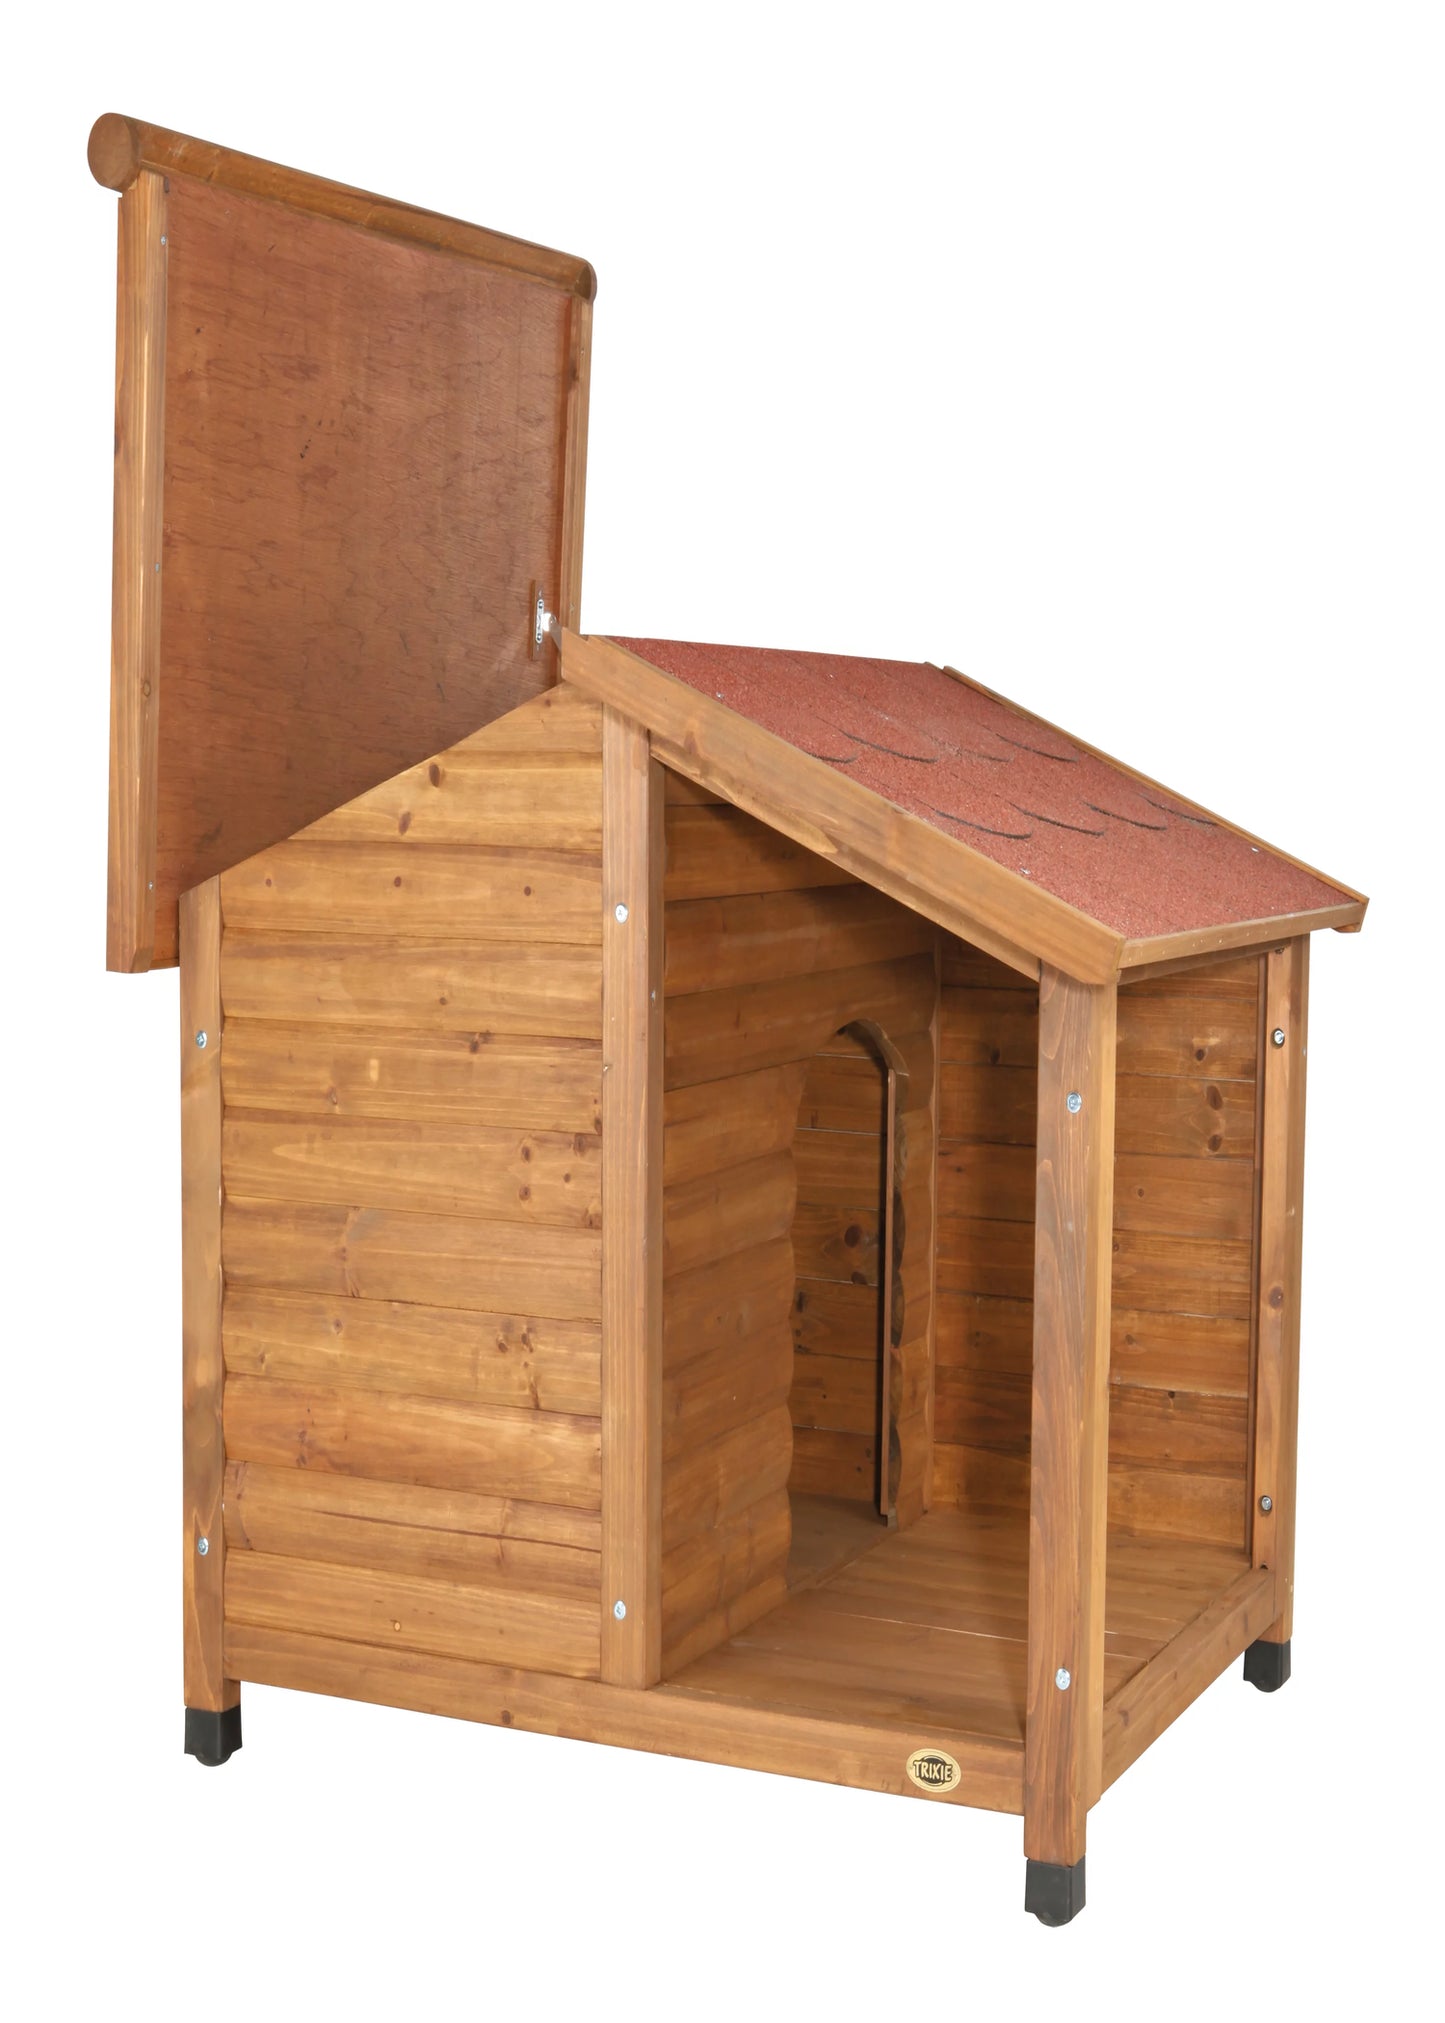 TRIXIE Natura Lodge Dog House, Covered Porch, Hinged Roof, Adjustable Legs, Brown, Small Animals & Pet Supplies > Pet Supplies > Dog Supplies > Dog Houses TRIXIE   